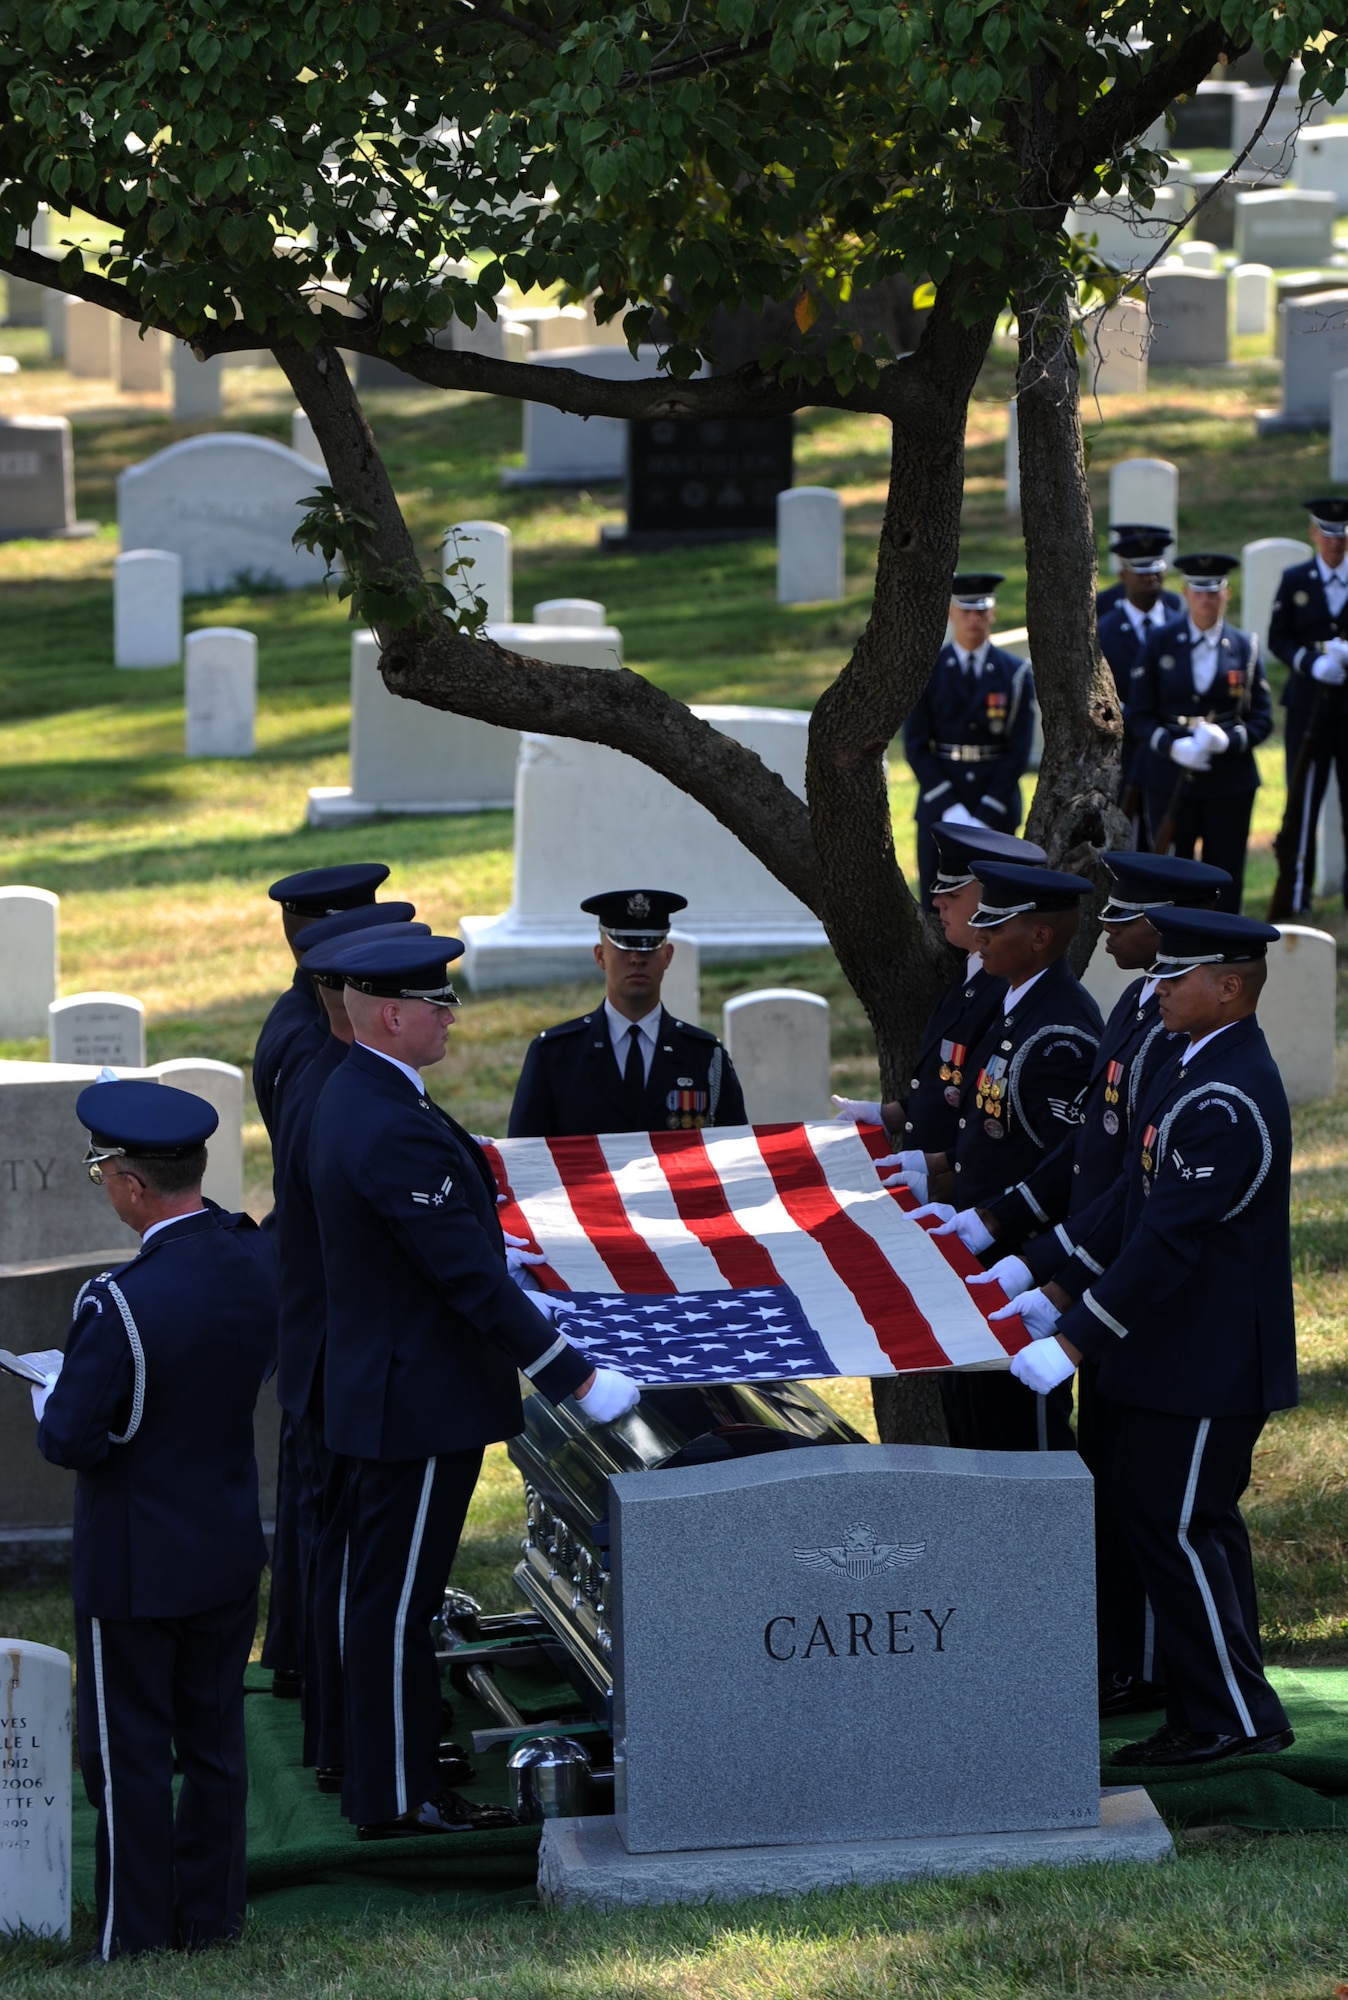 Members of the Air Force Honor Guard prepare to fold the flag during the funeral service at Arlington National Cemetery for retired Col. John Carey Aug. 12, 2011. As the ceremonial flag was folded for the last time, the Air Force chaplain presiding over the ceremony quoted the inscription on the John Paul Jones Memorial: “In life he honored the flag. In death the flag shall honor him.” (U.S. Air Force photo/Staff Sgt. Tiffany Trojca)